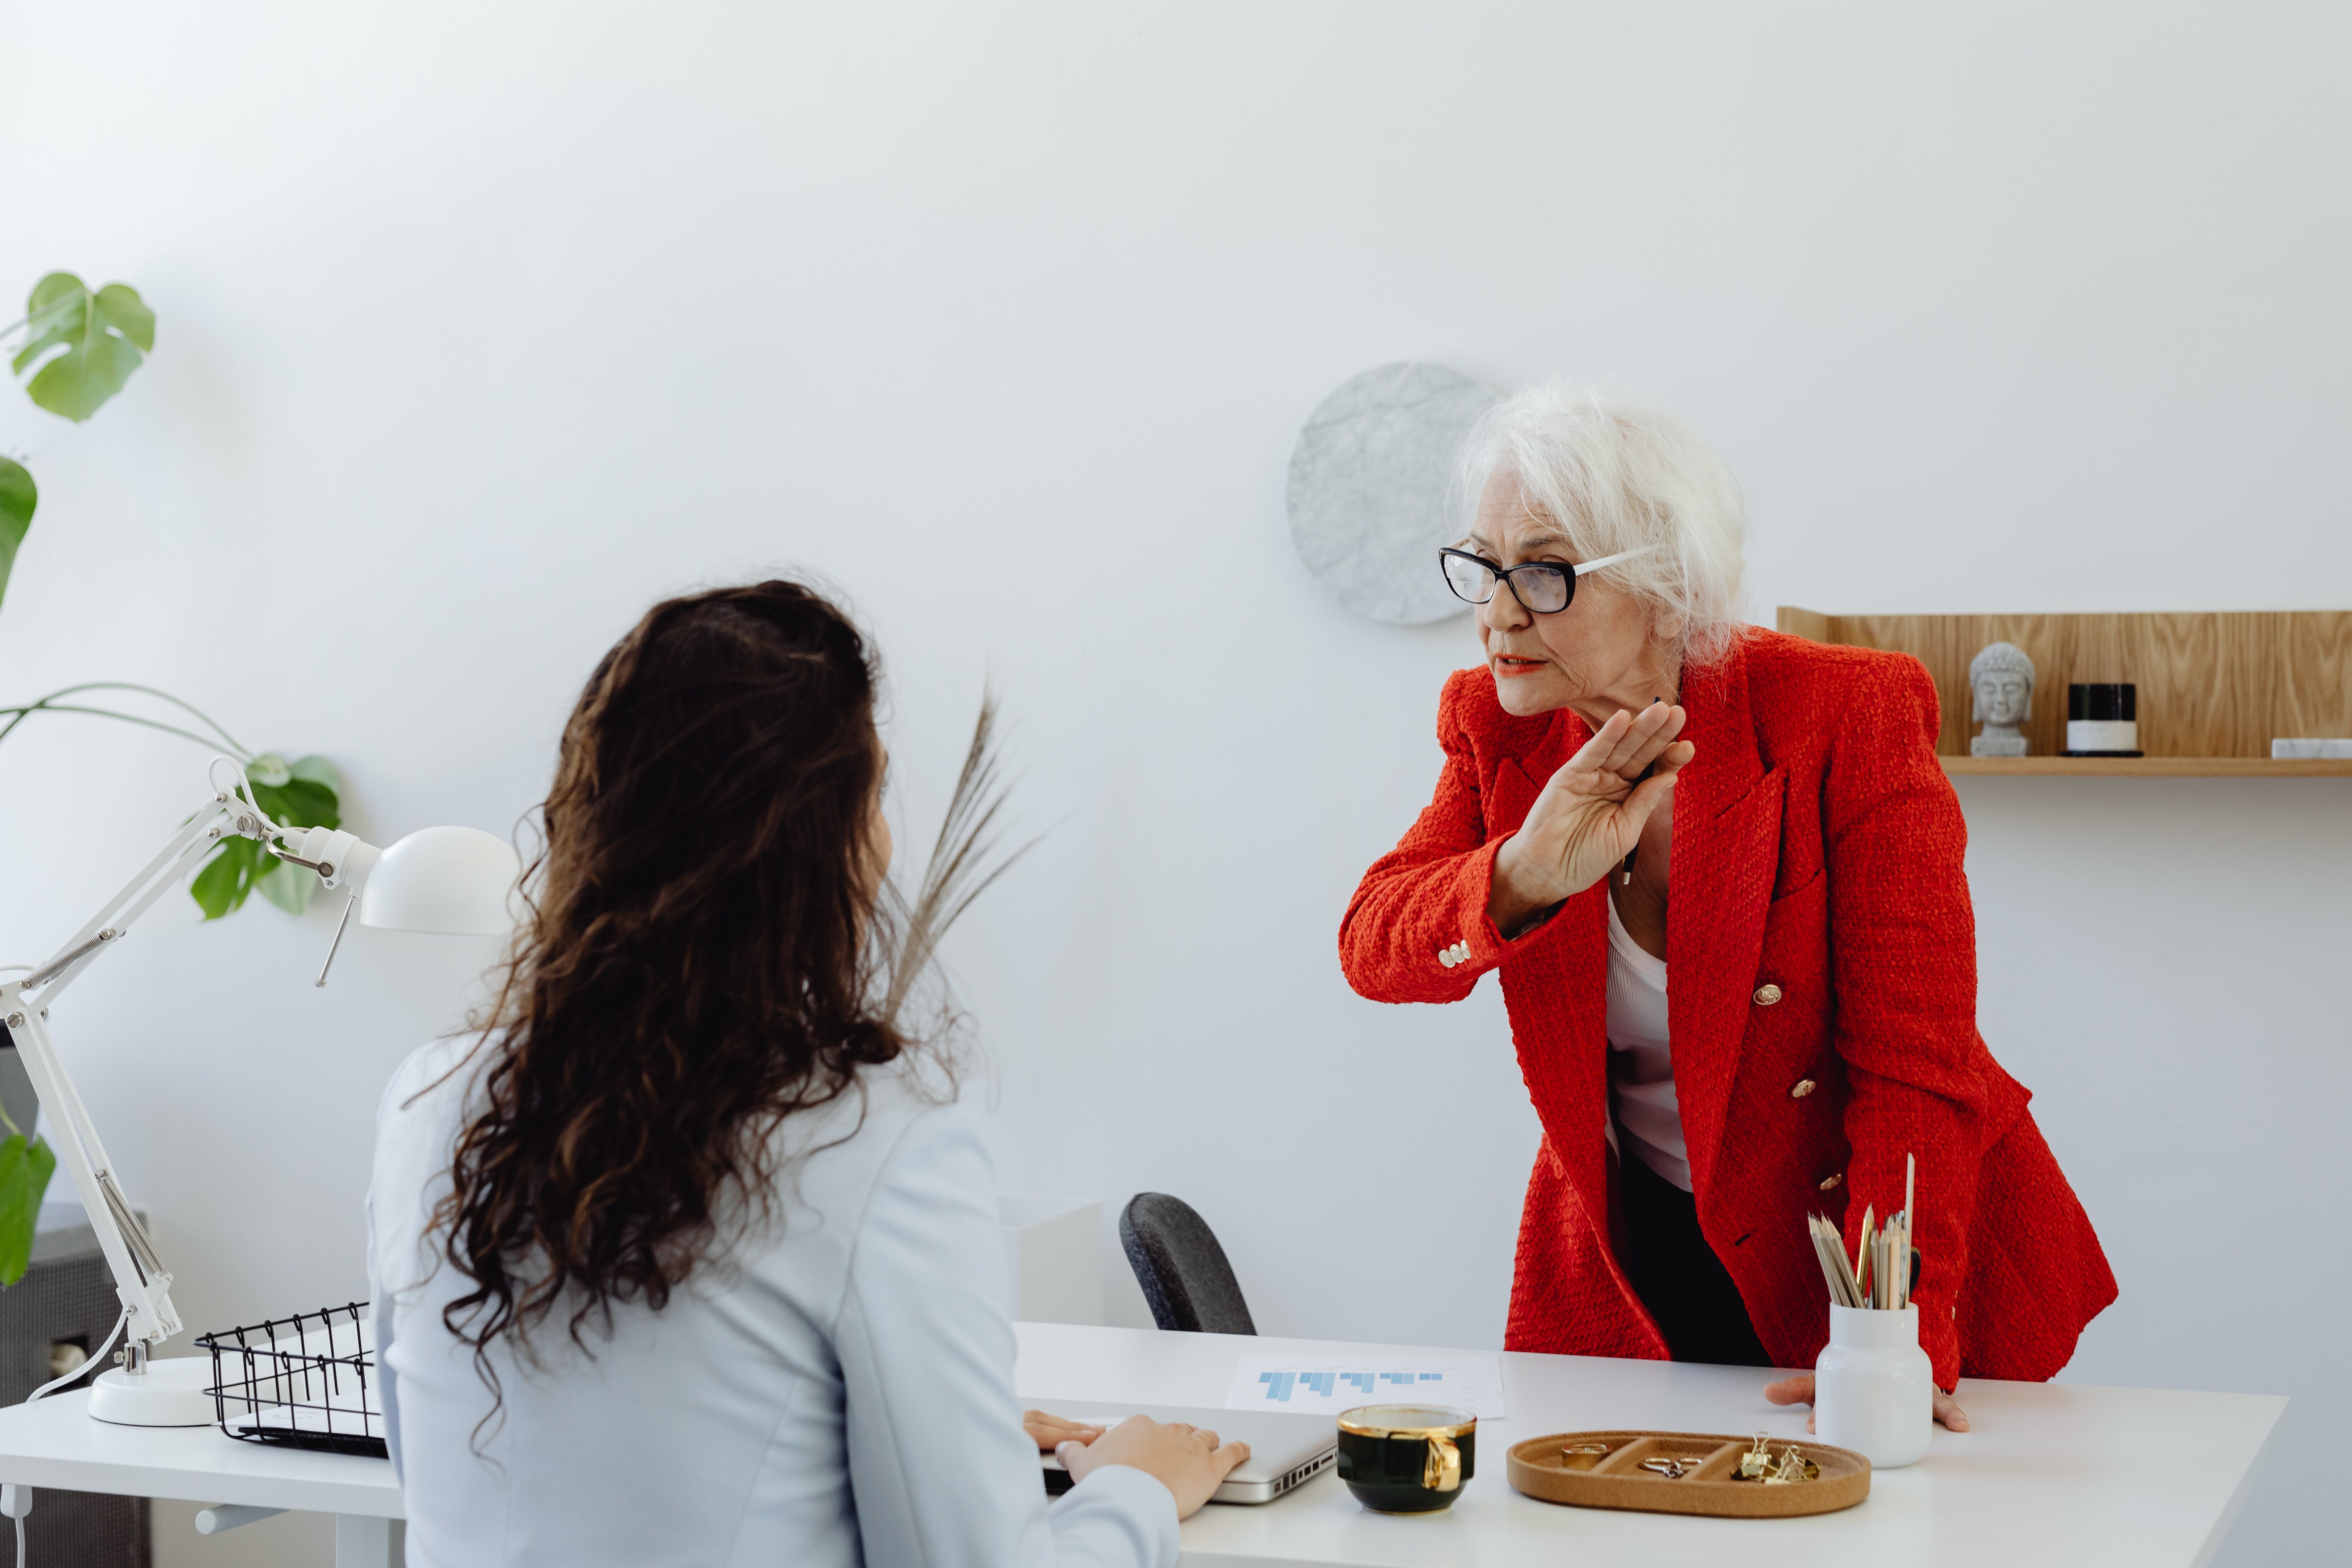 An older woman standing arguing with a younger one who's seated | Source: Pexels